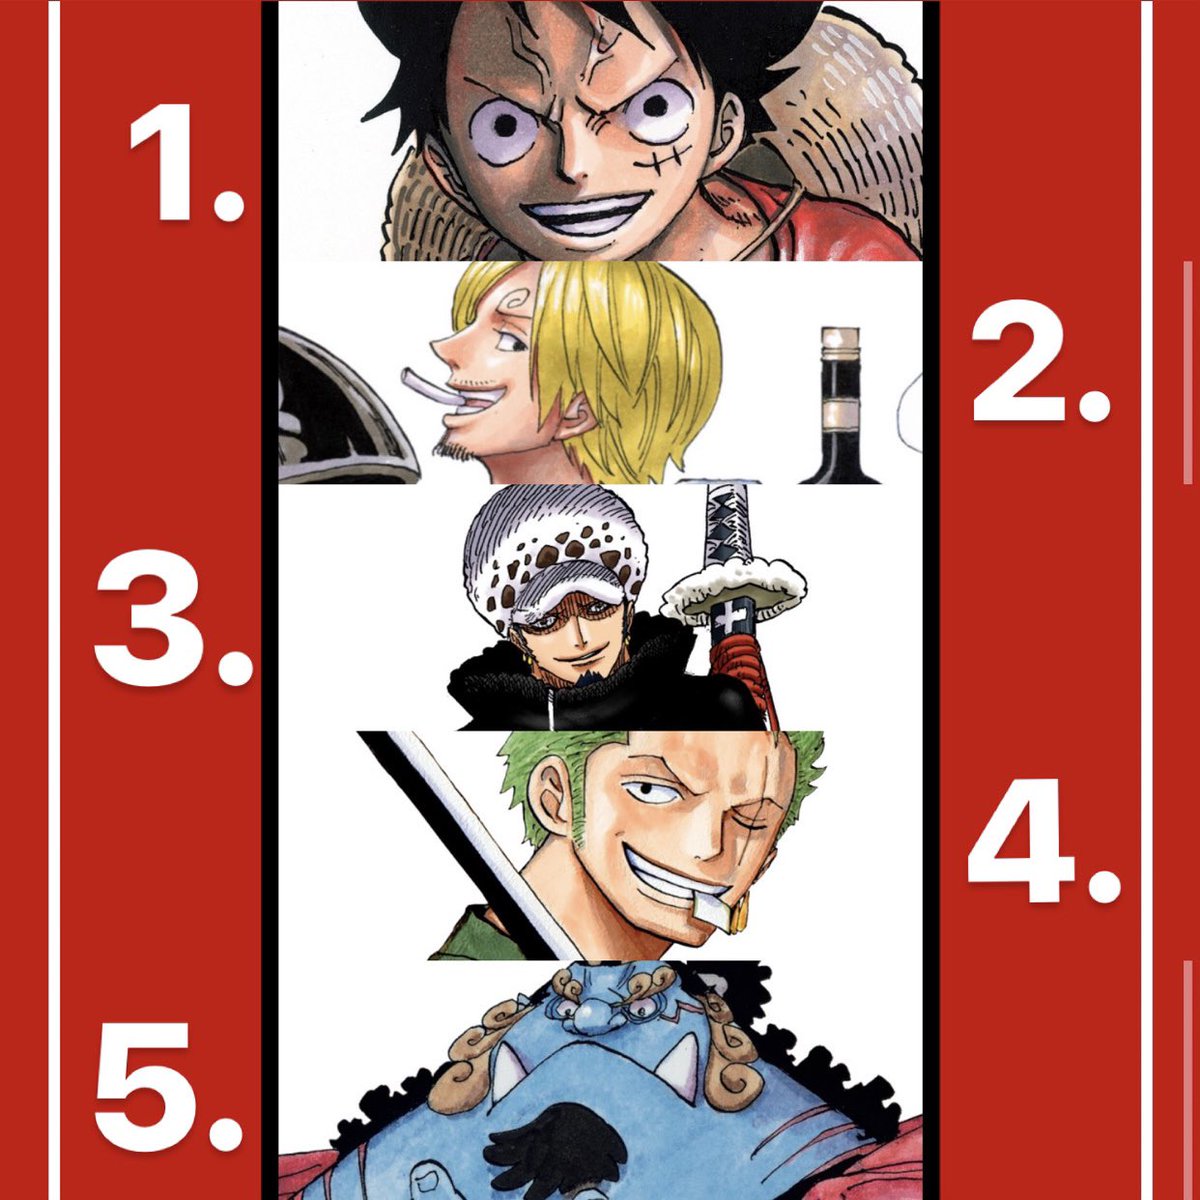 Kamui Miracle Here Are My Top One Piece Characters As Of Whole Cale Onepiece Wt100 Luffy Zoro Sanji Nami Usopp Strawhat Onepiece1000logs T Co Ulbgakegqm Twitter